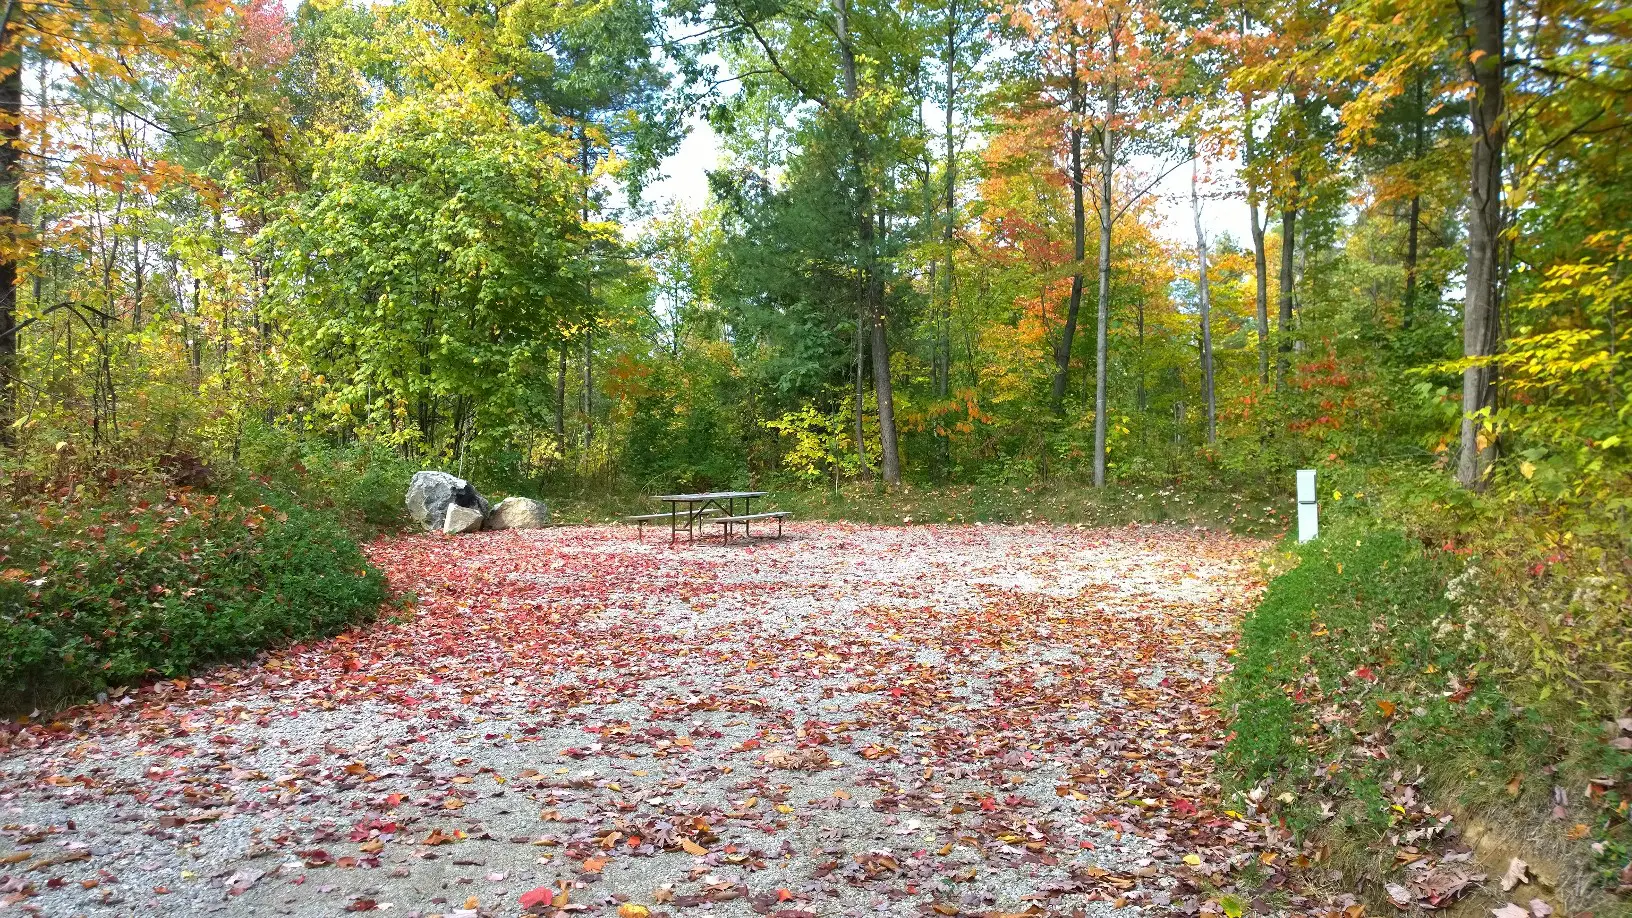 vacant campsite in autumn at moose hillock resort in lake george ny